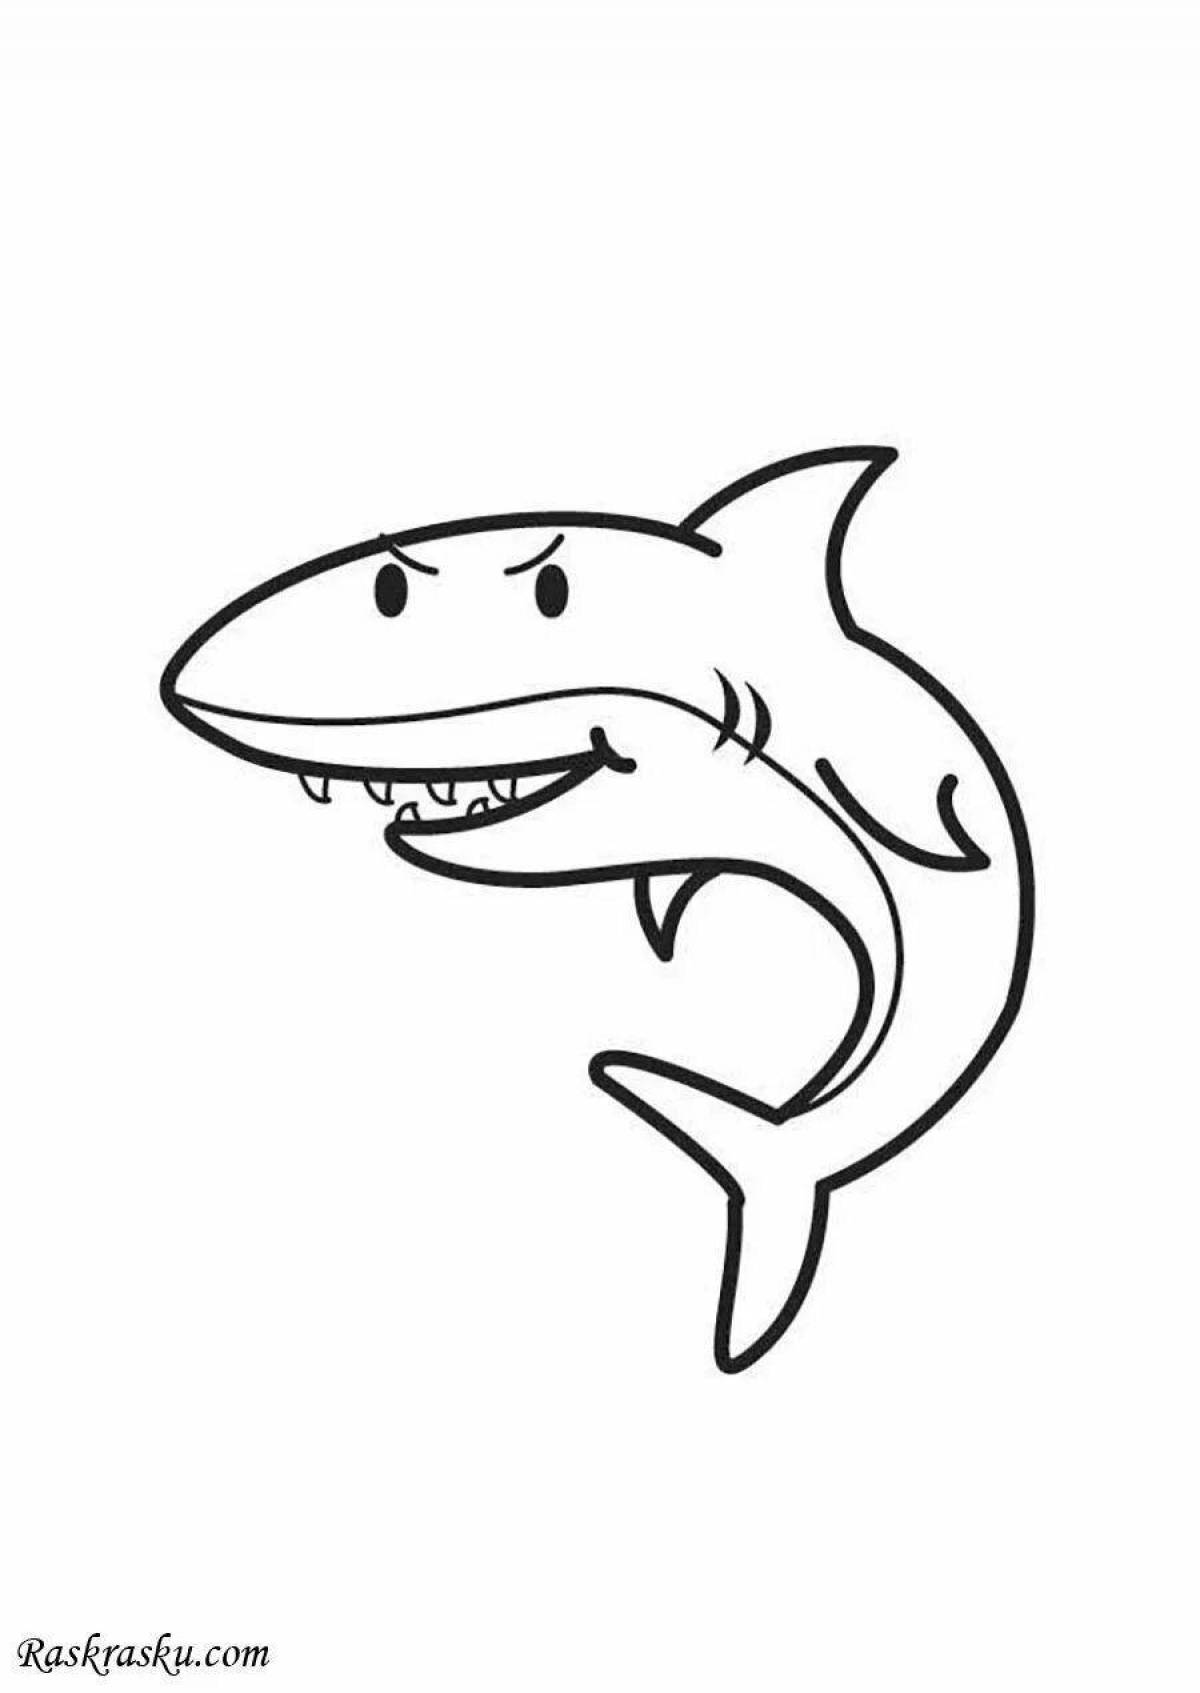 Playful shark coloring page for kids